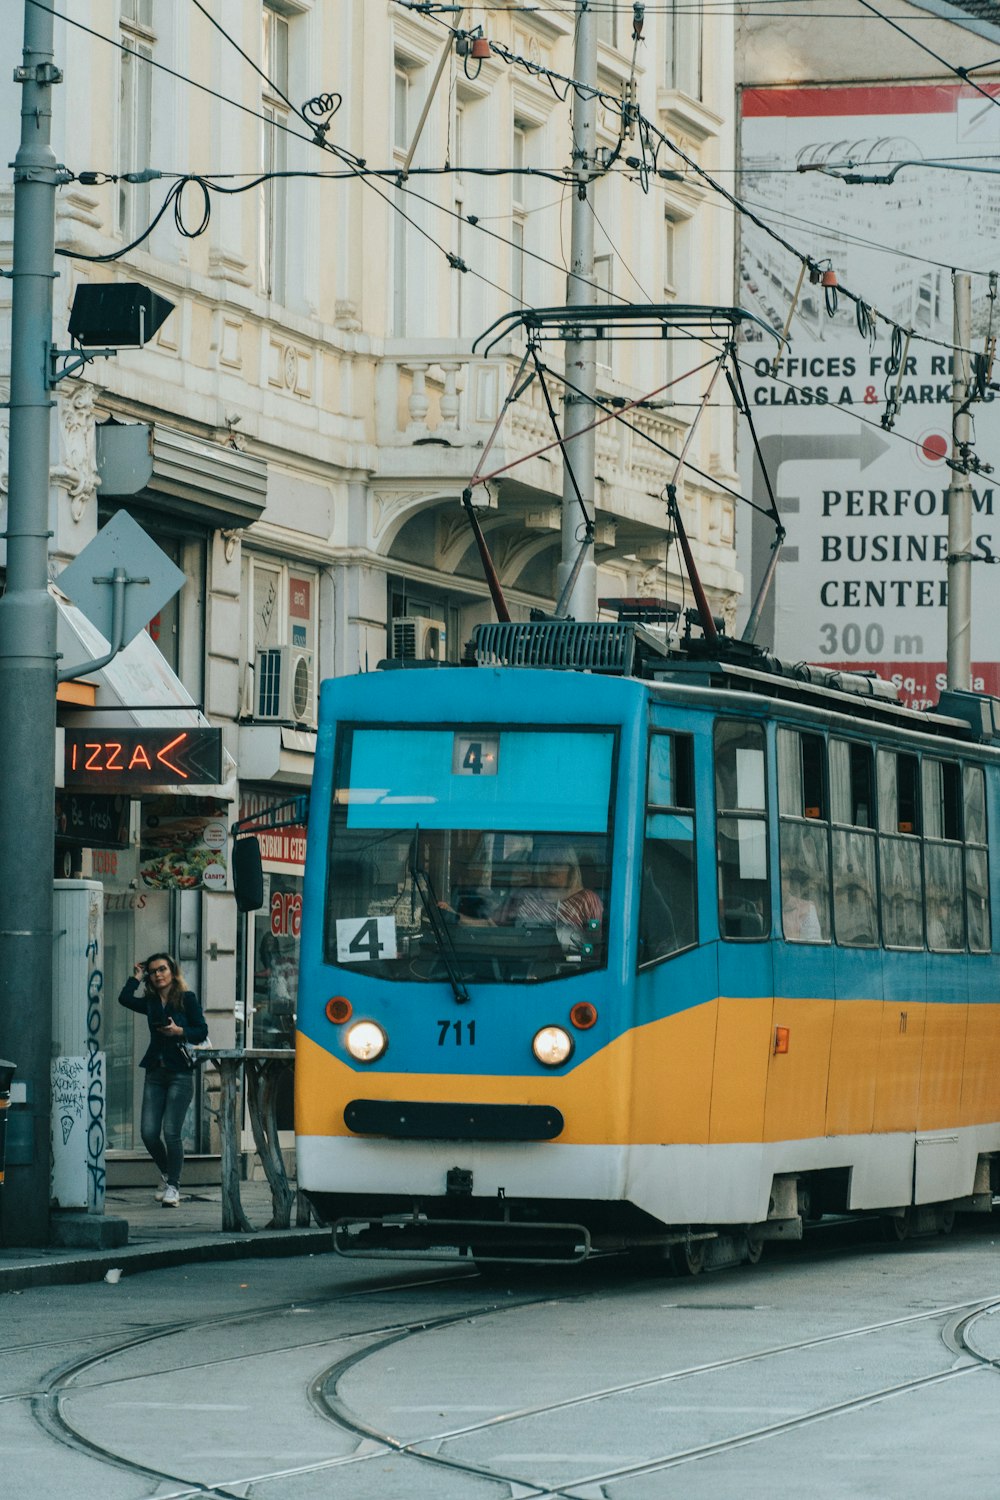 tram near building view during daytime